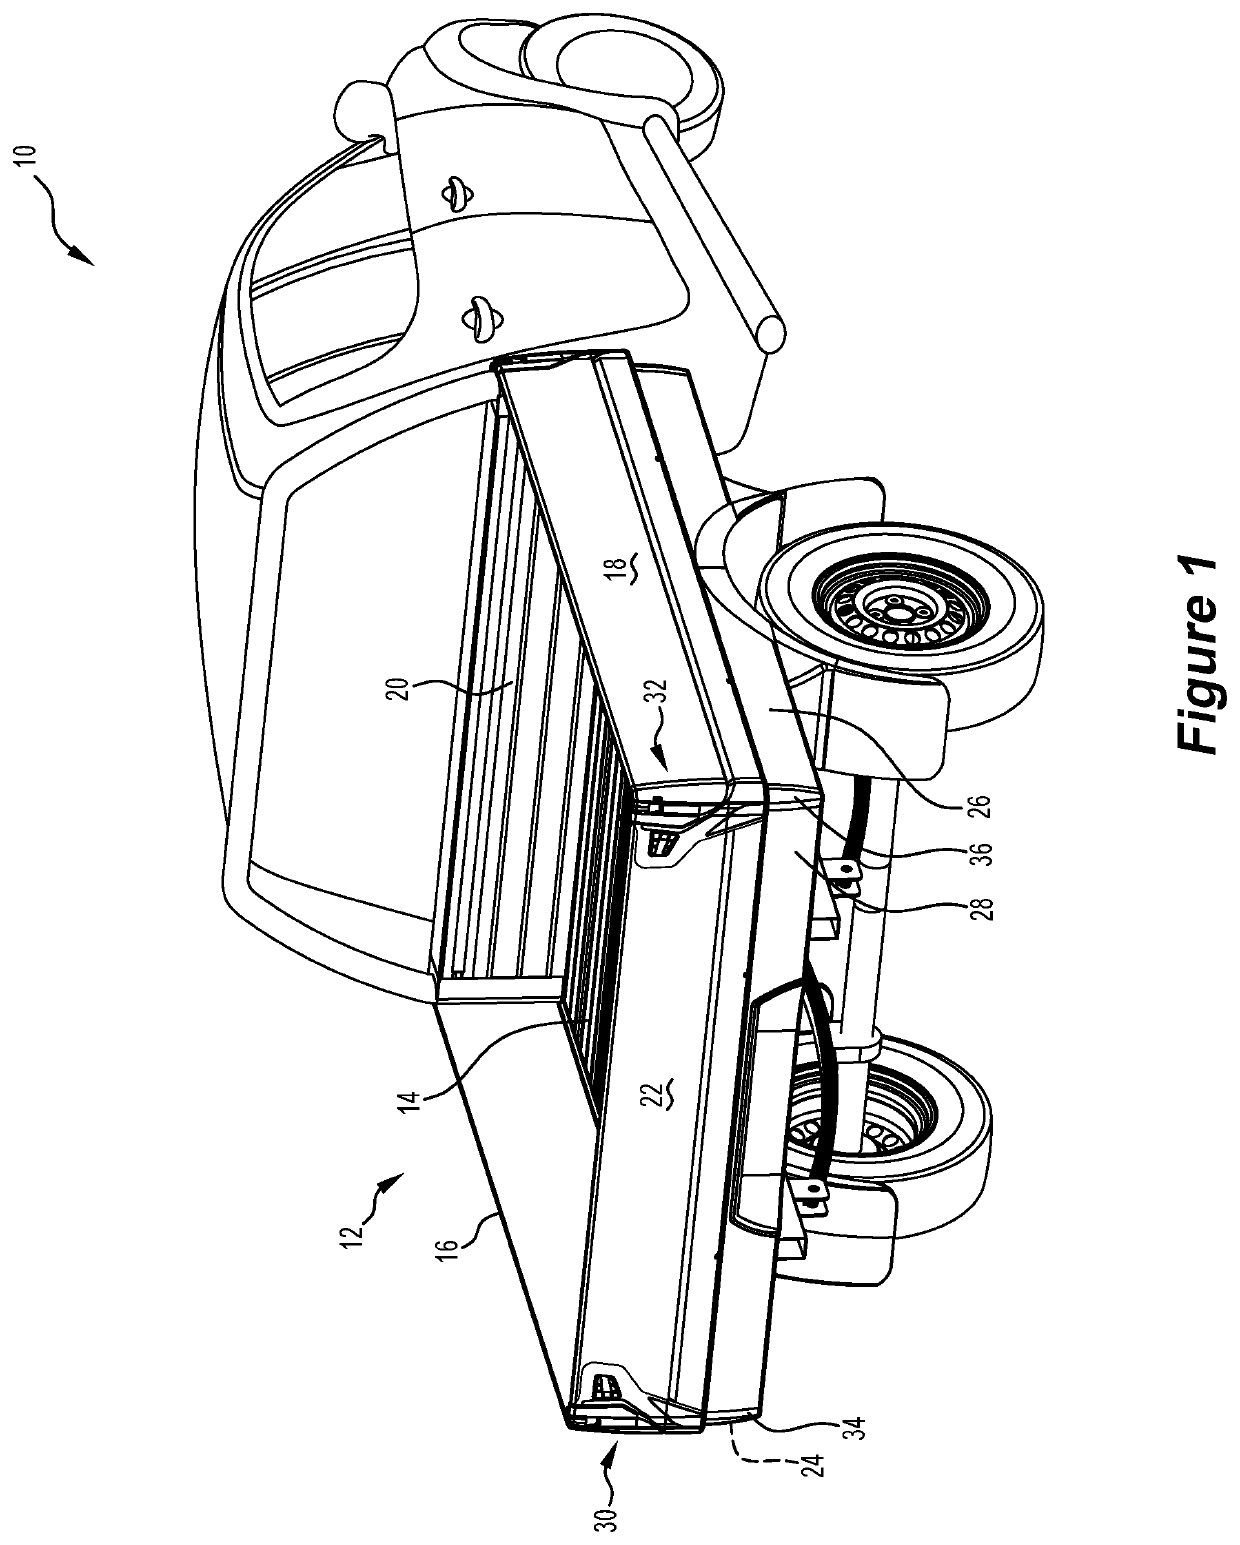 Utility vehicle corner module with gate securing apparatus